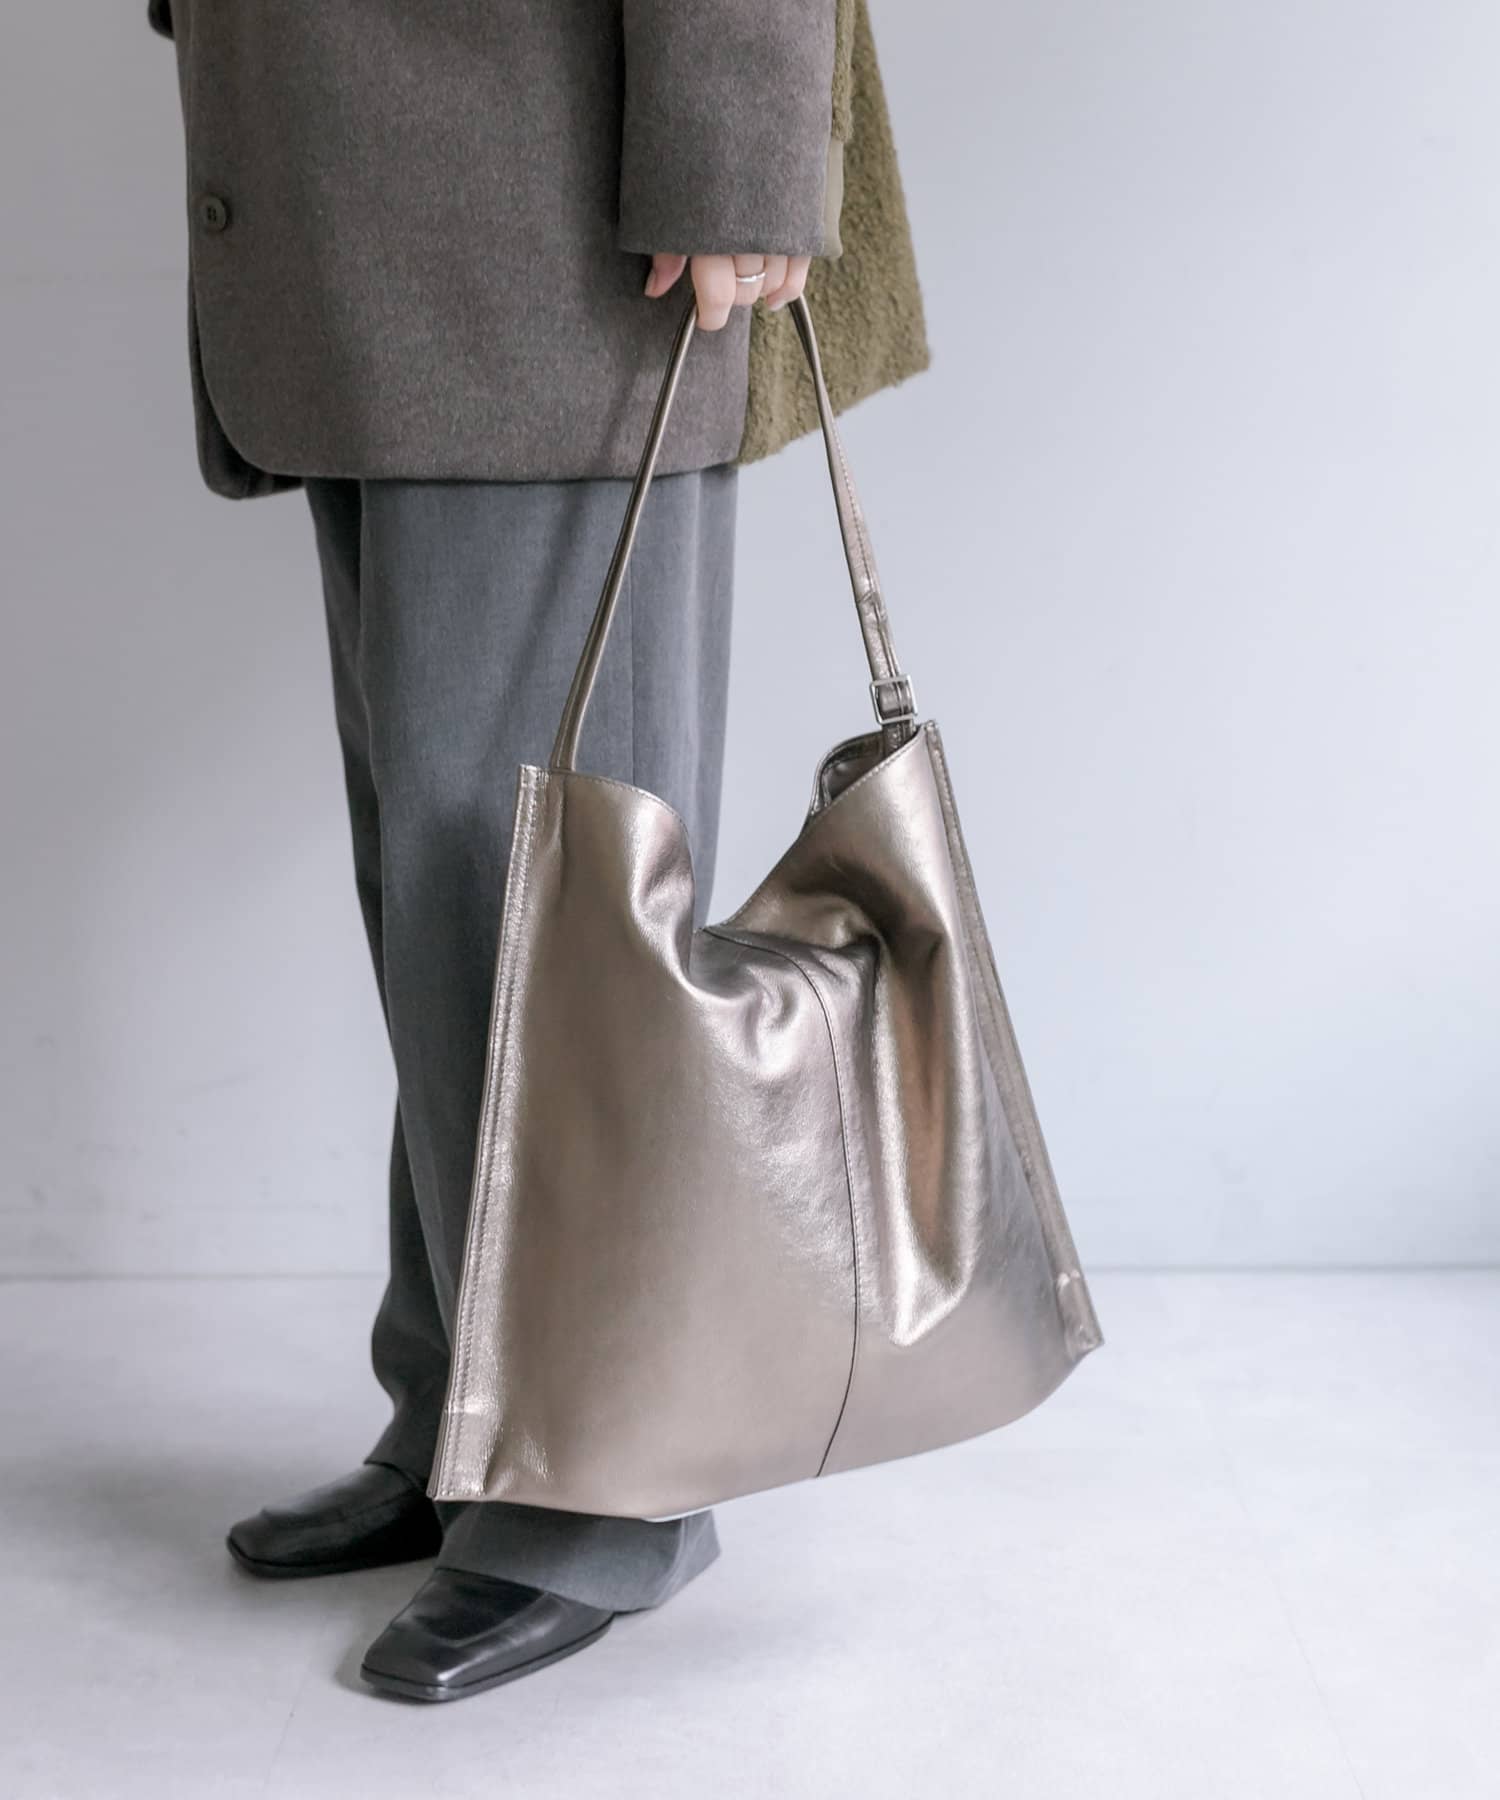 L'or One-handle Square Bag 【Taupe】 | www.fleettracktz.com